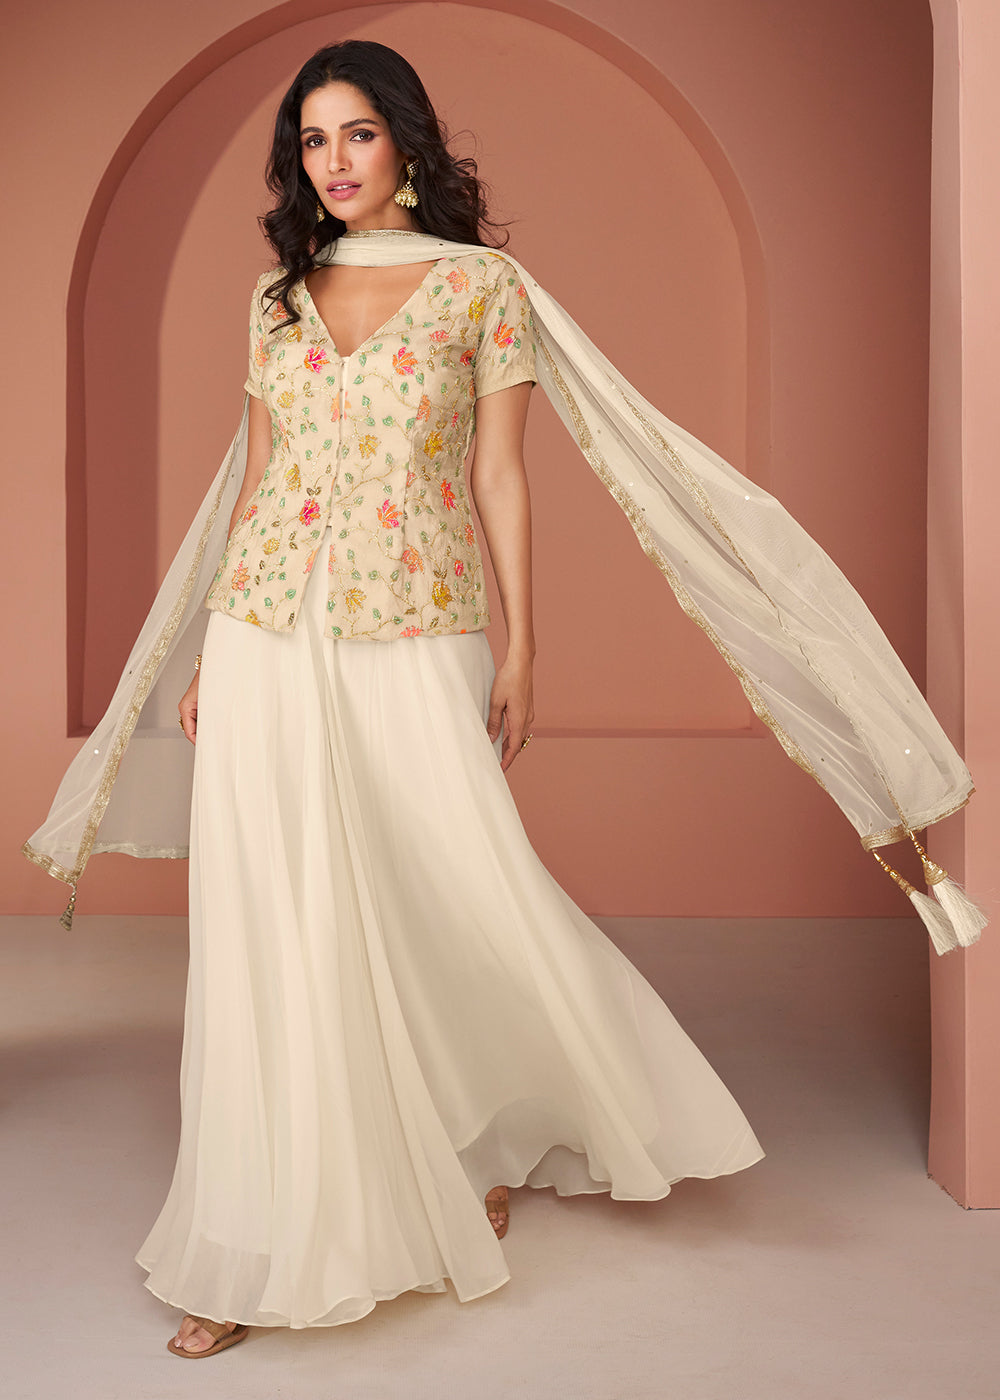 Pastel Pink & Peach Saree Style Indo Western Gown 168GW14